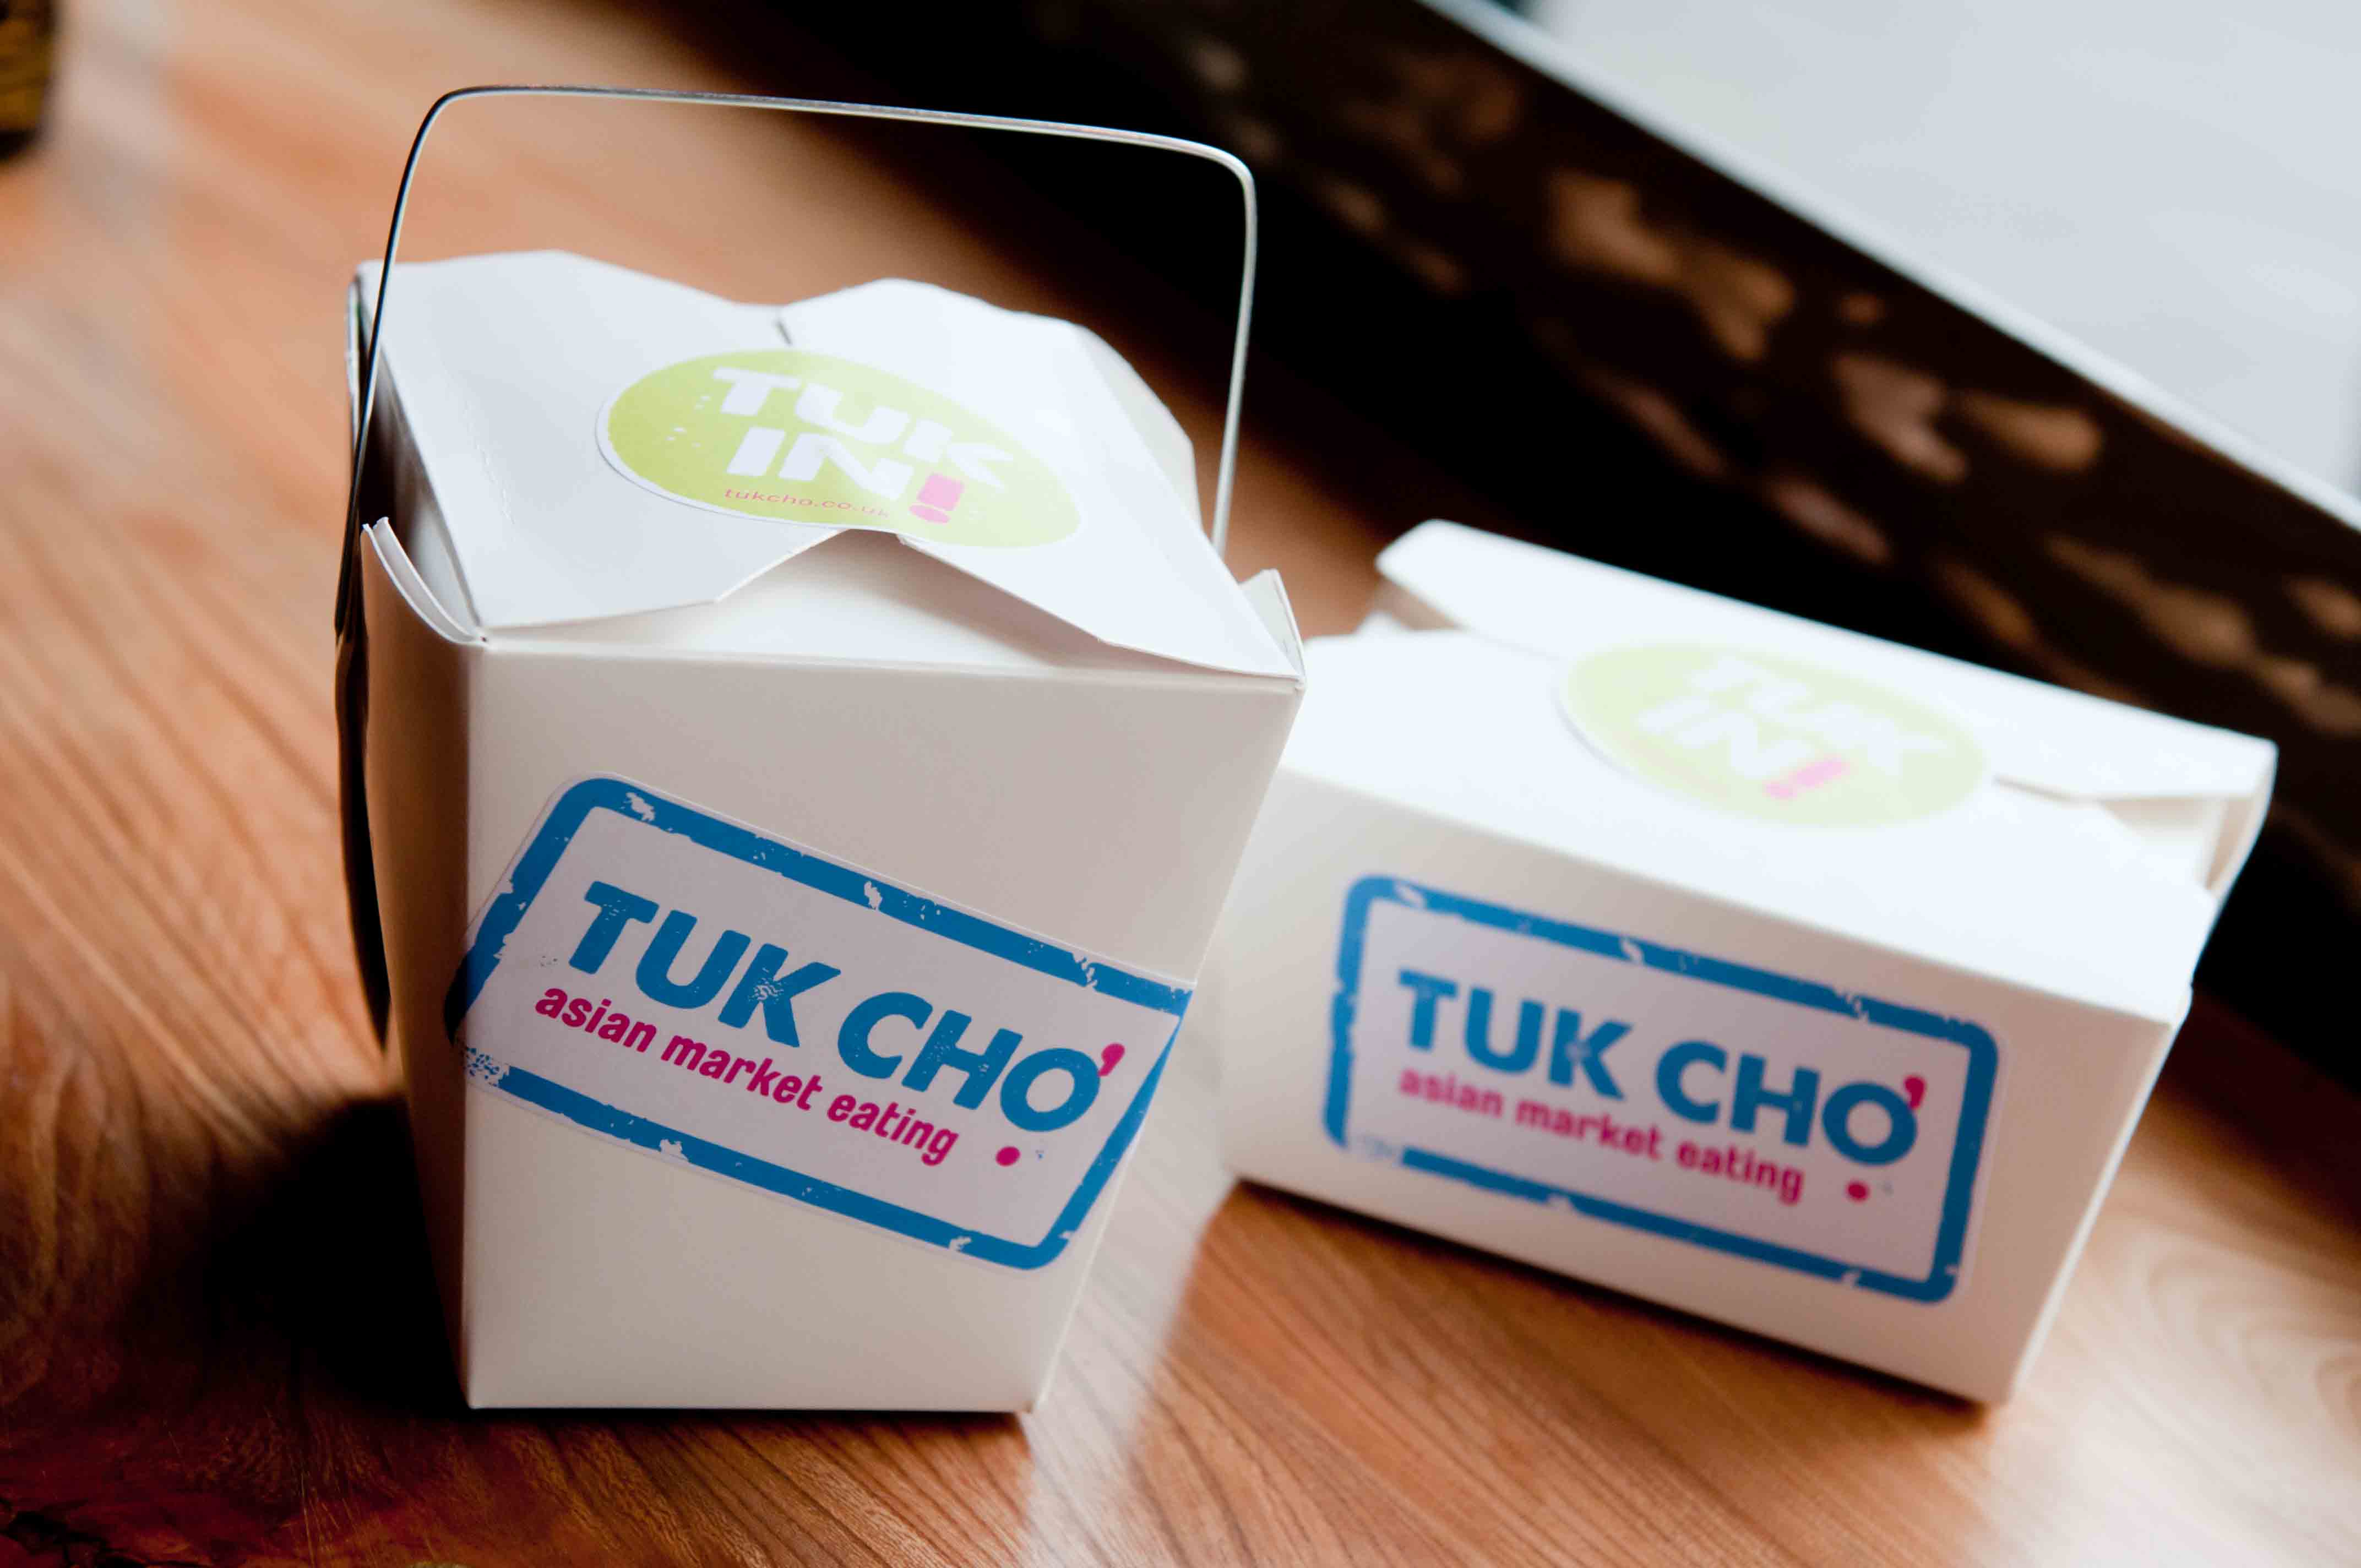 Tuk cho - Asian Market Eating containers